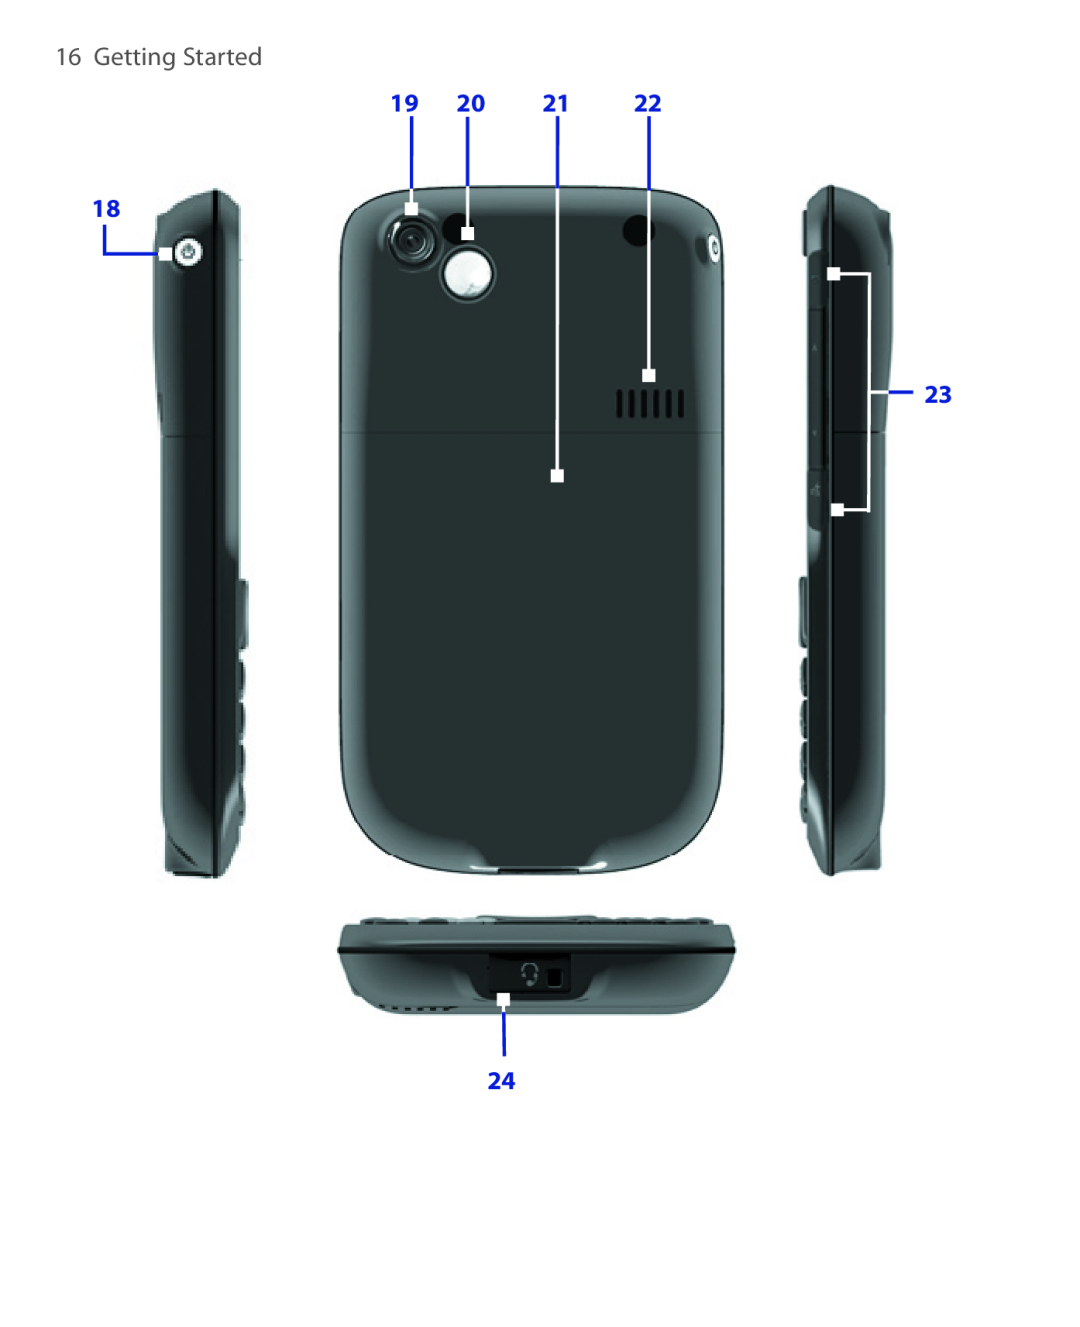 HTC HTC S621 user manual Getting Started, 19 20 21 